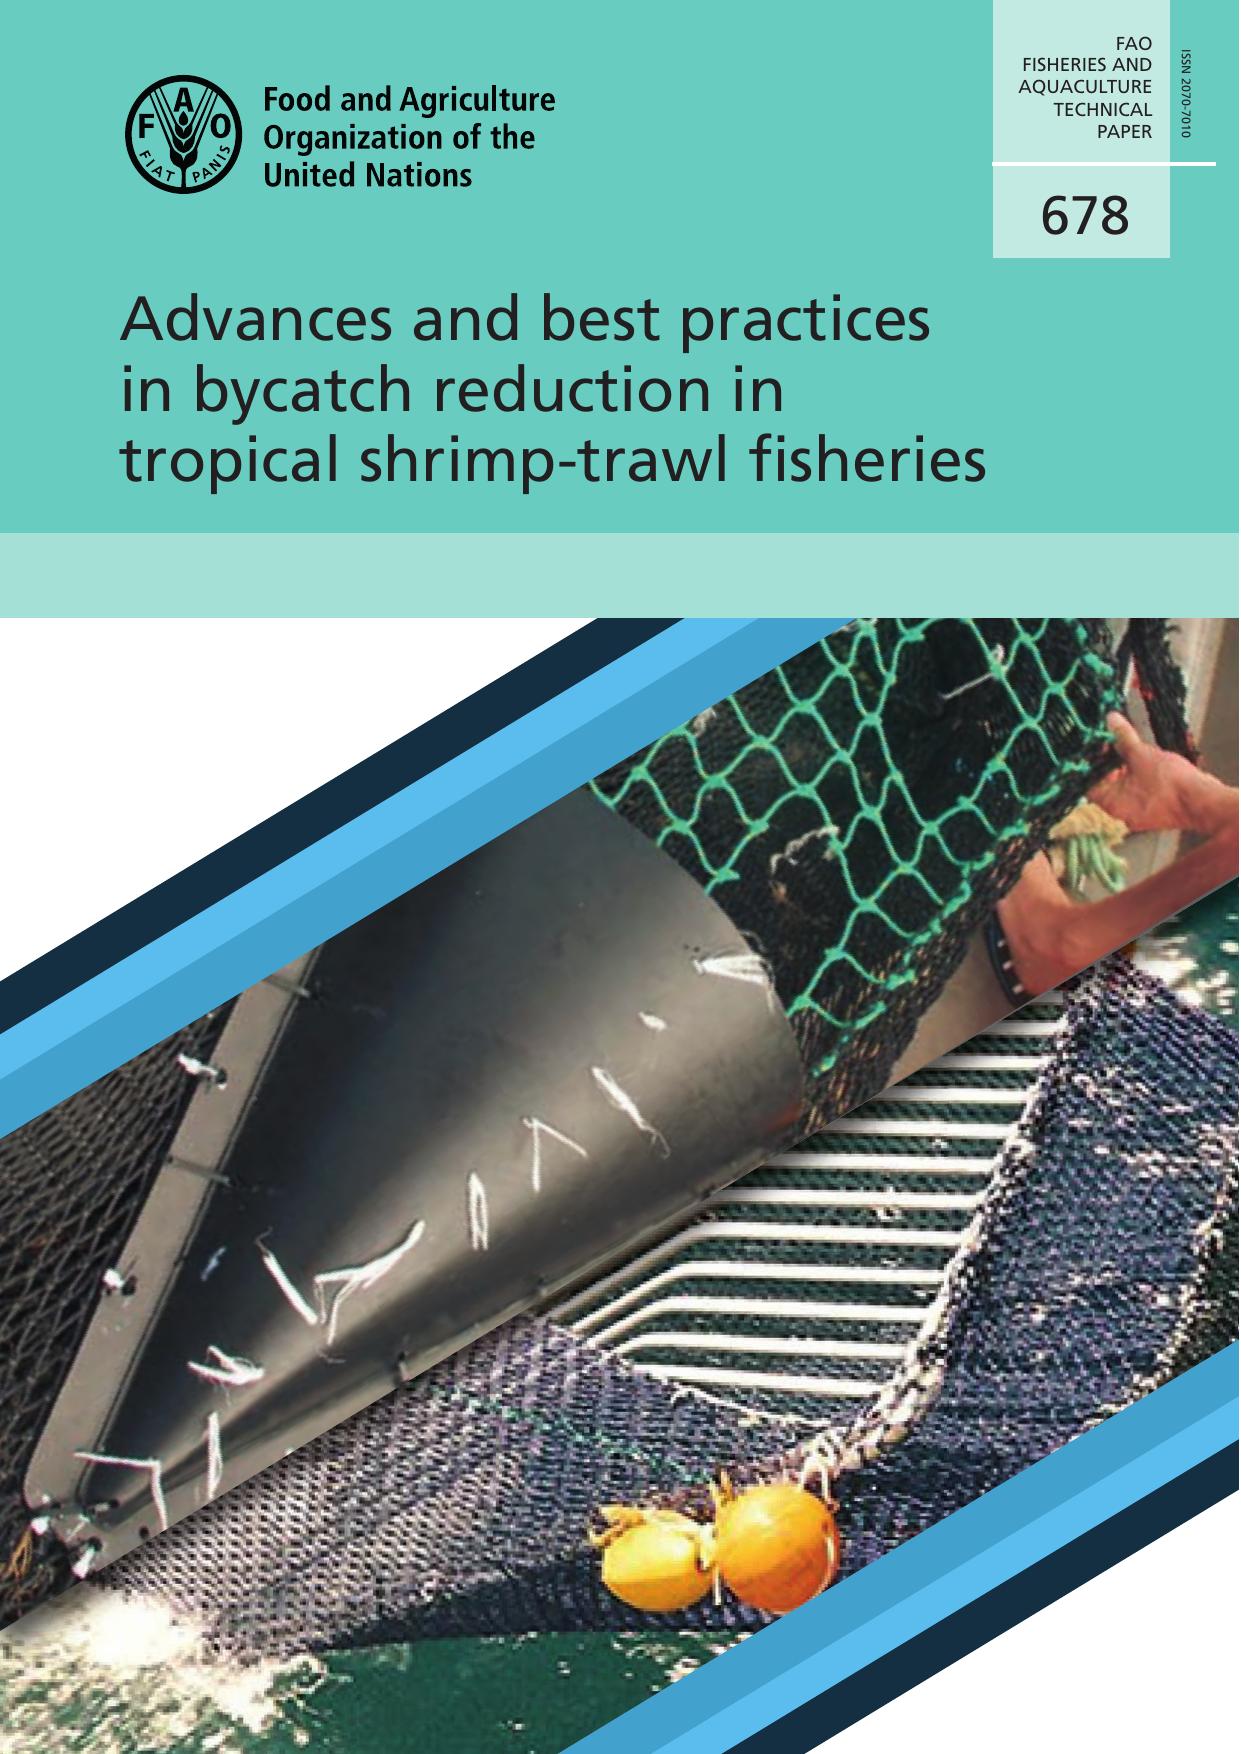 Advances and best practices in bycatch reduction in tropical shrimp-trawl fisheries